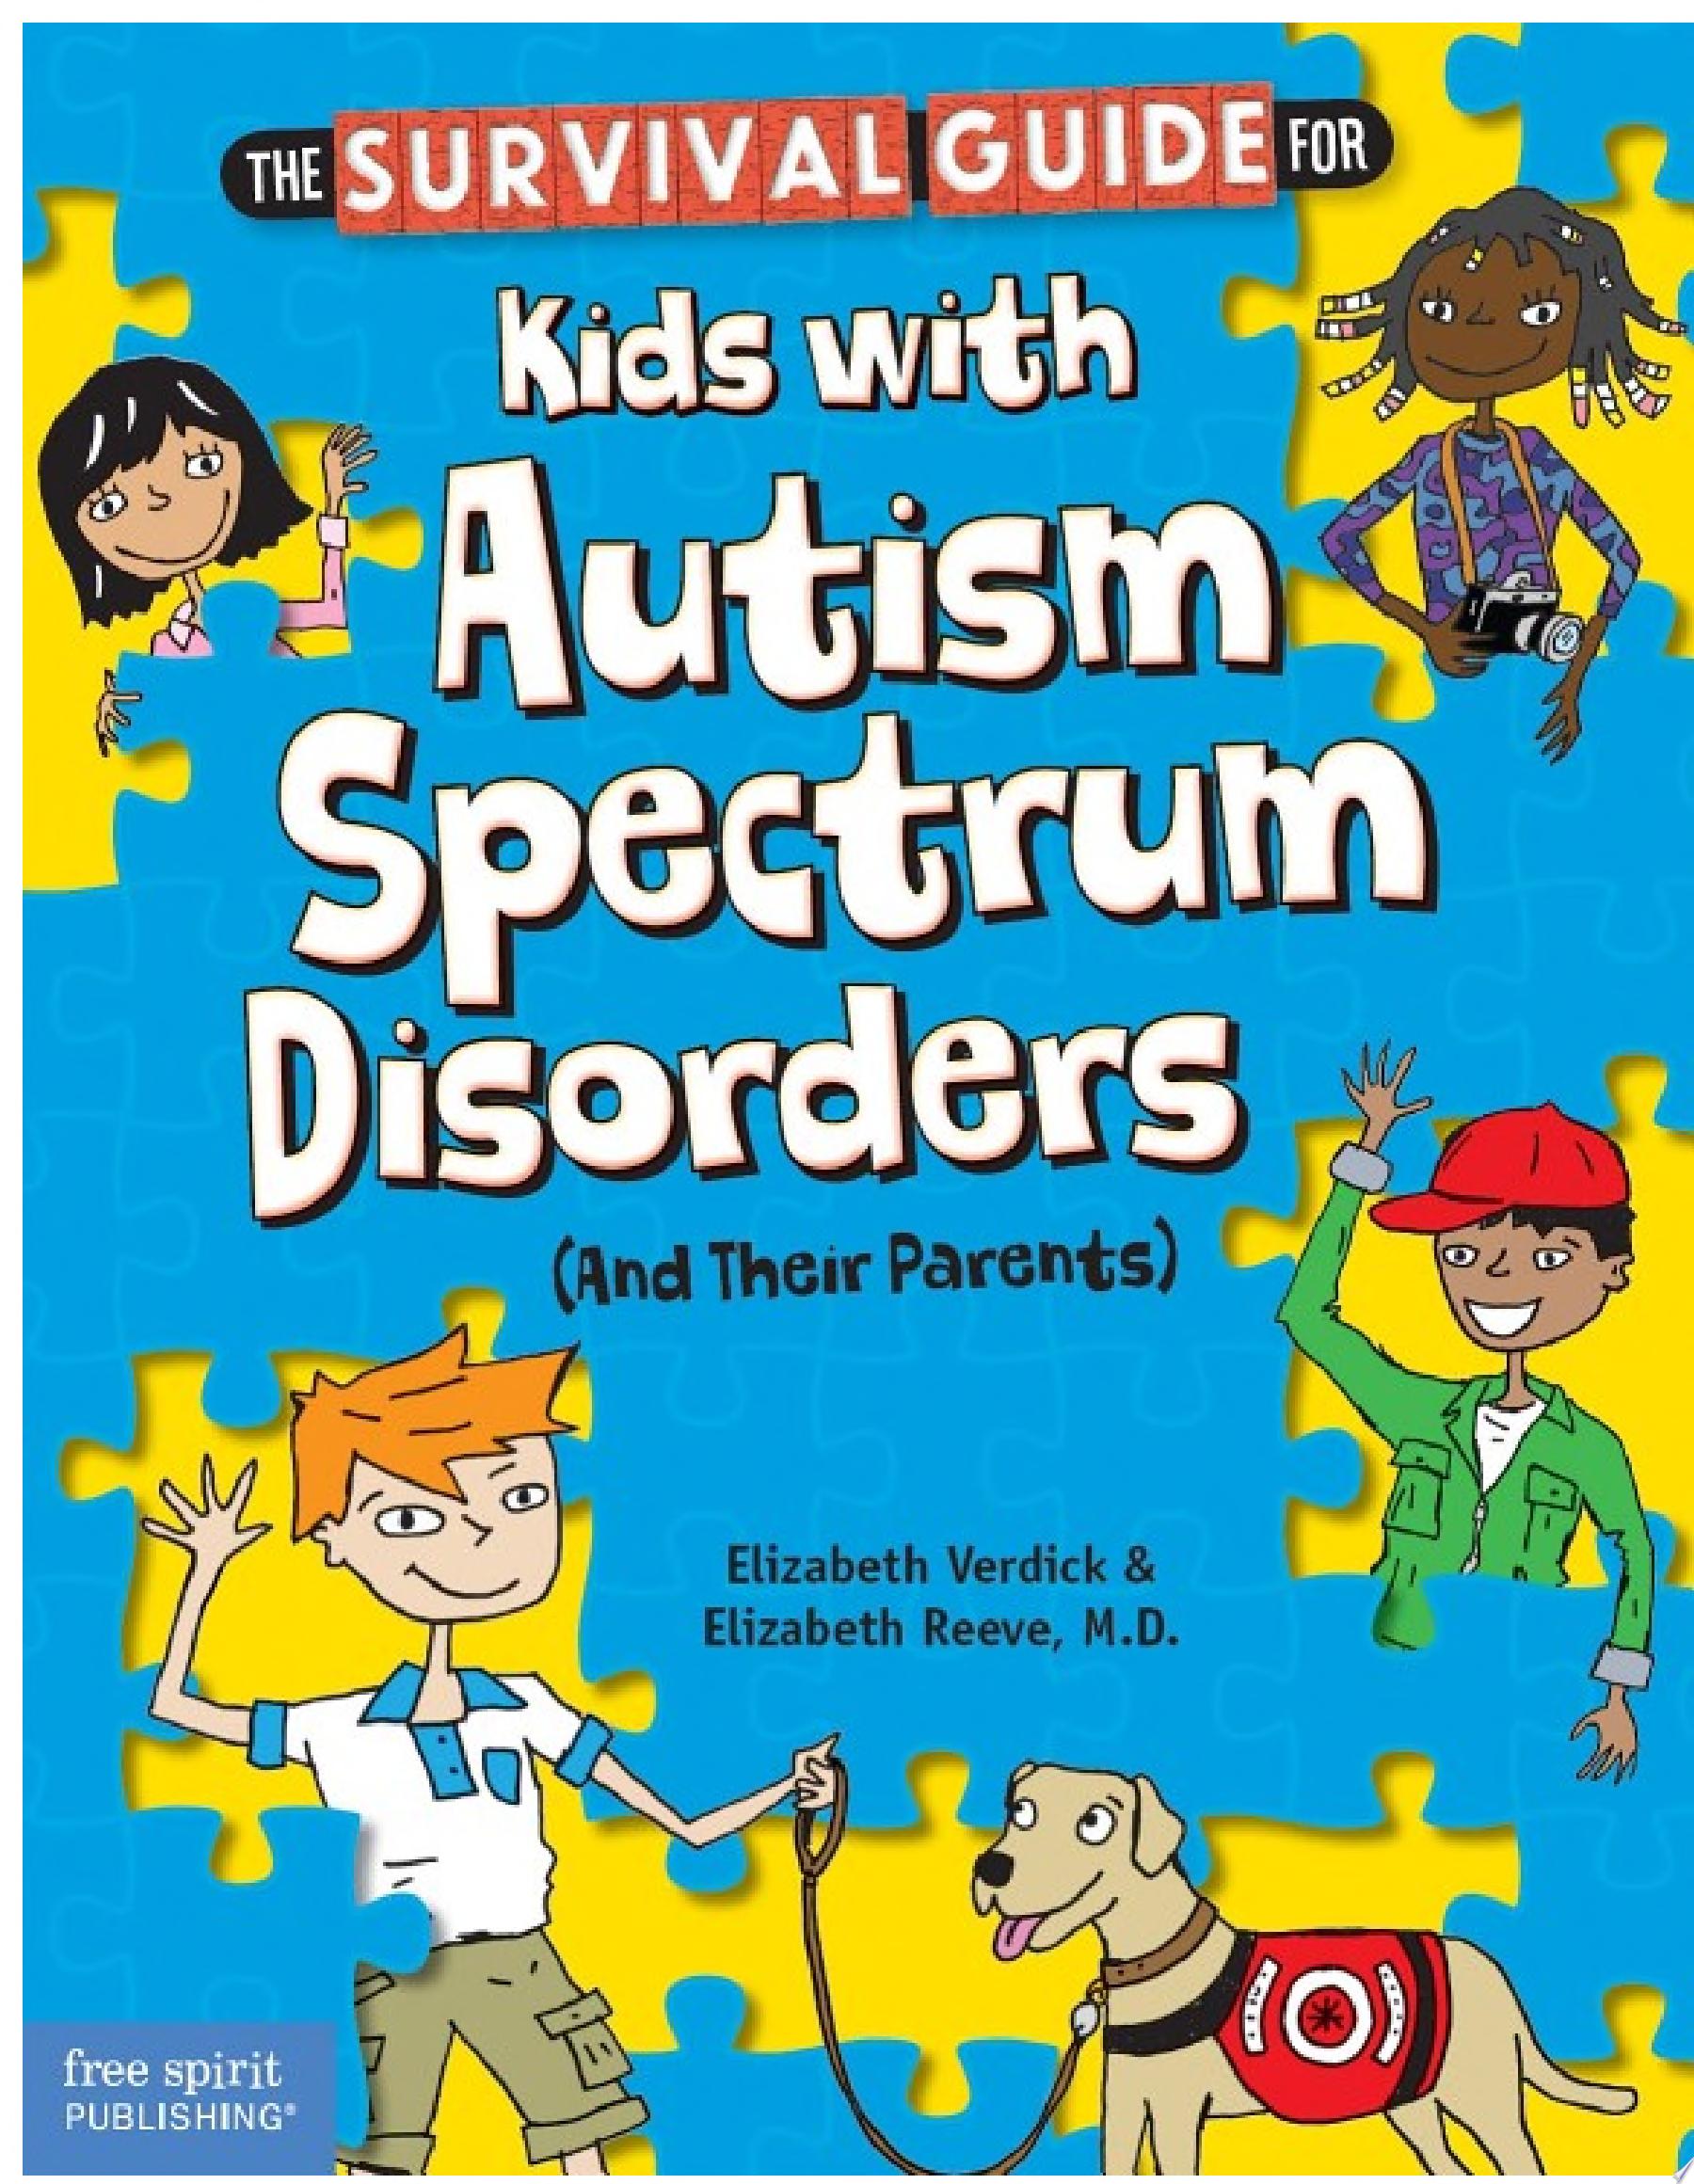 Image for "The Survival Guide for Kids with Autism Spectrum Disorders (And Their Parents)"